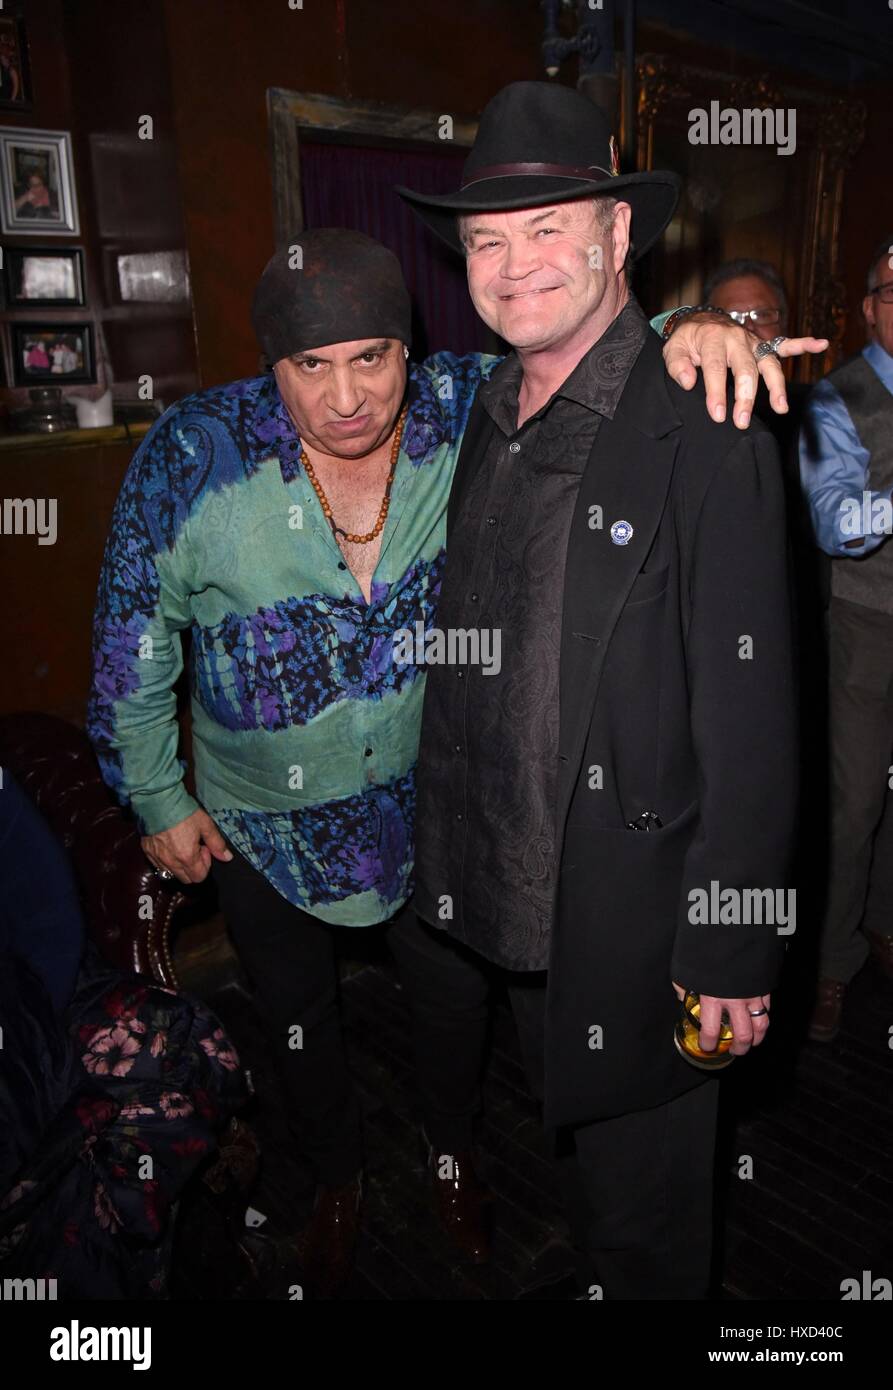 New York, NY, USA. 27th Mar, 2017. Little Steven Van Zandt, Micky Dolenz at arrivals for Micky Dolenz Private Party, The Cutting Room, New York, NY March 27, 2017. Credit: Derek Storm/Everett Collection/Alamy Live News Stock Photo